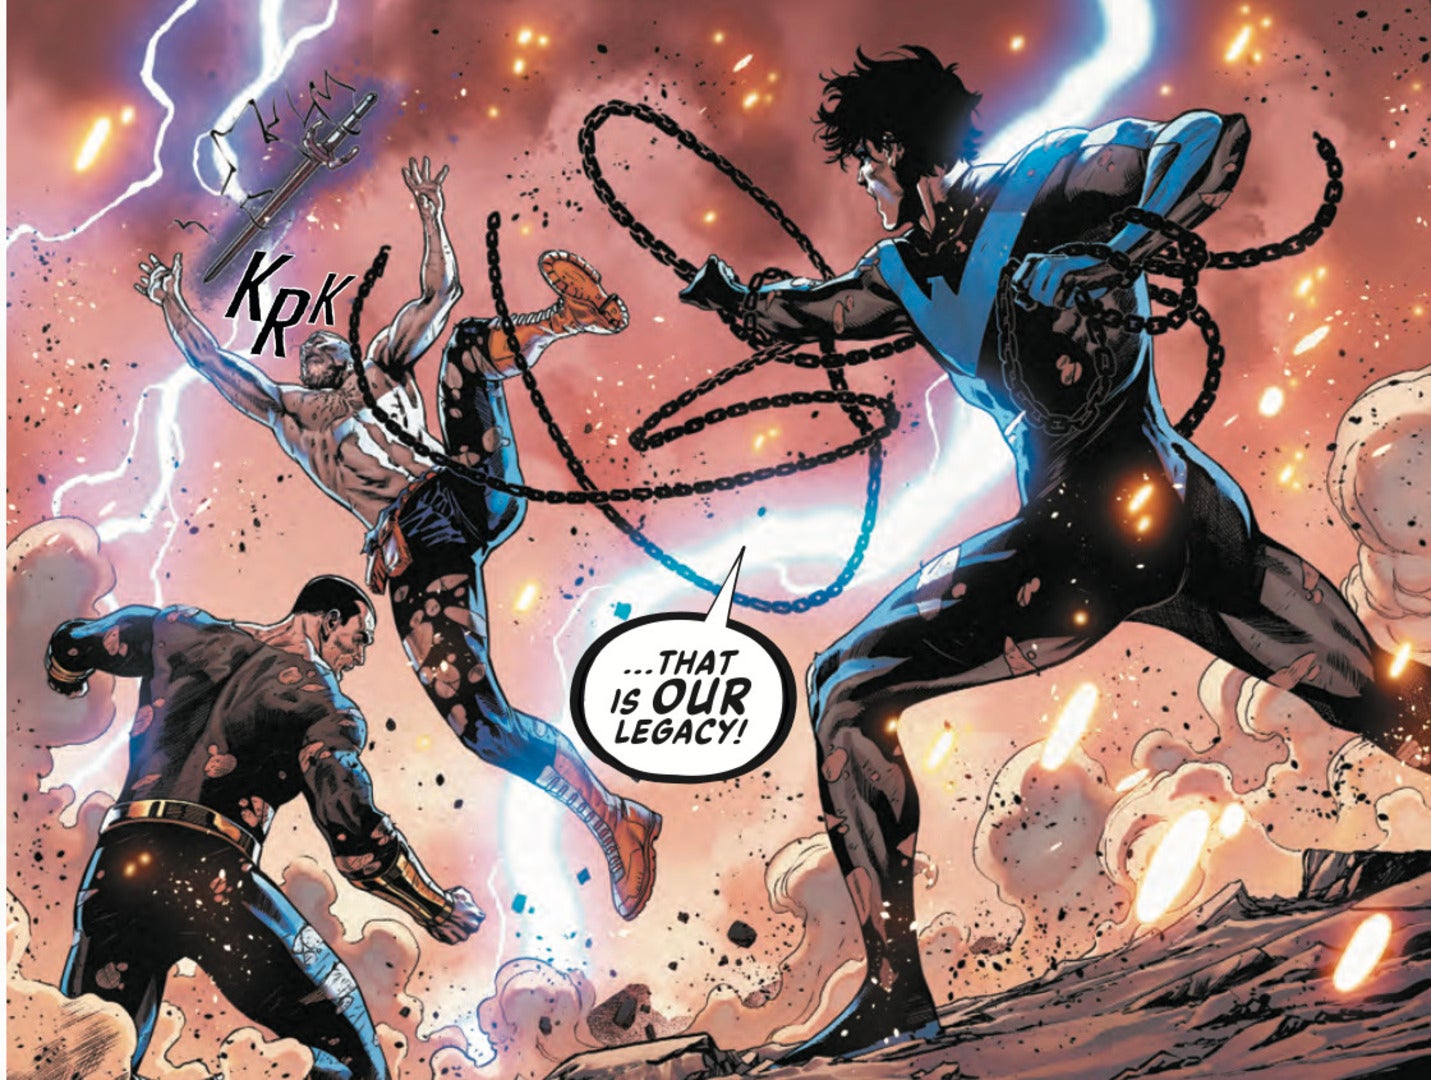 Nightwing hits Deathstroke with chains